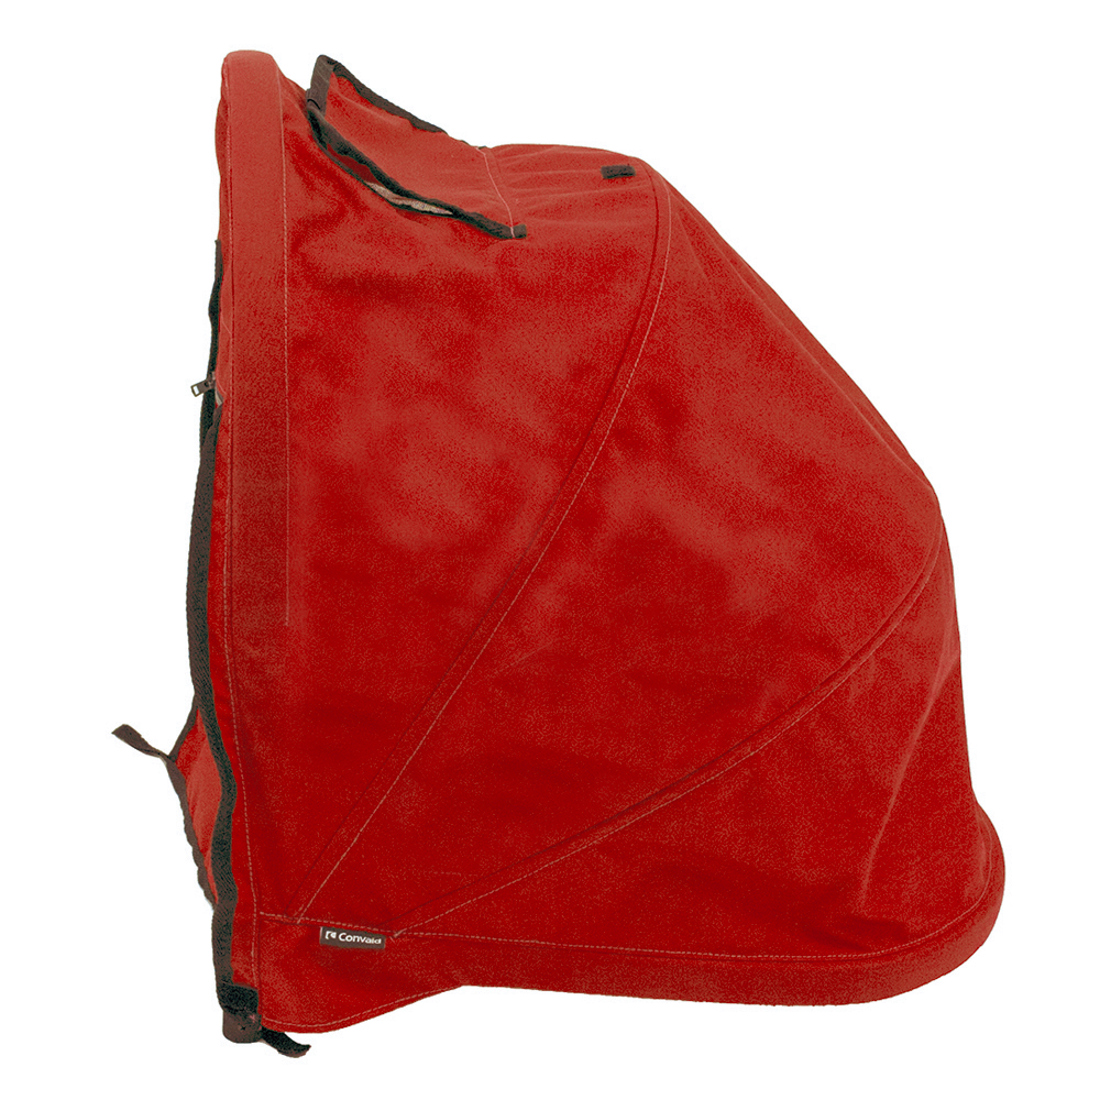 Extended Headrest Cover - No Windows (Canopy) Red